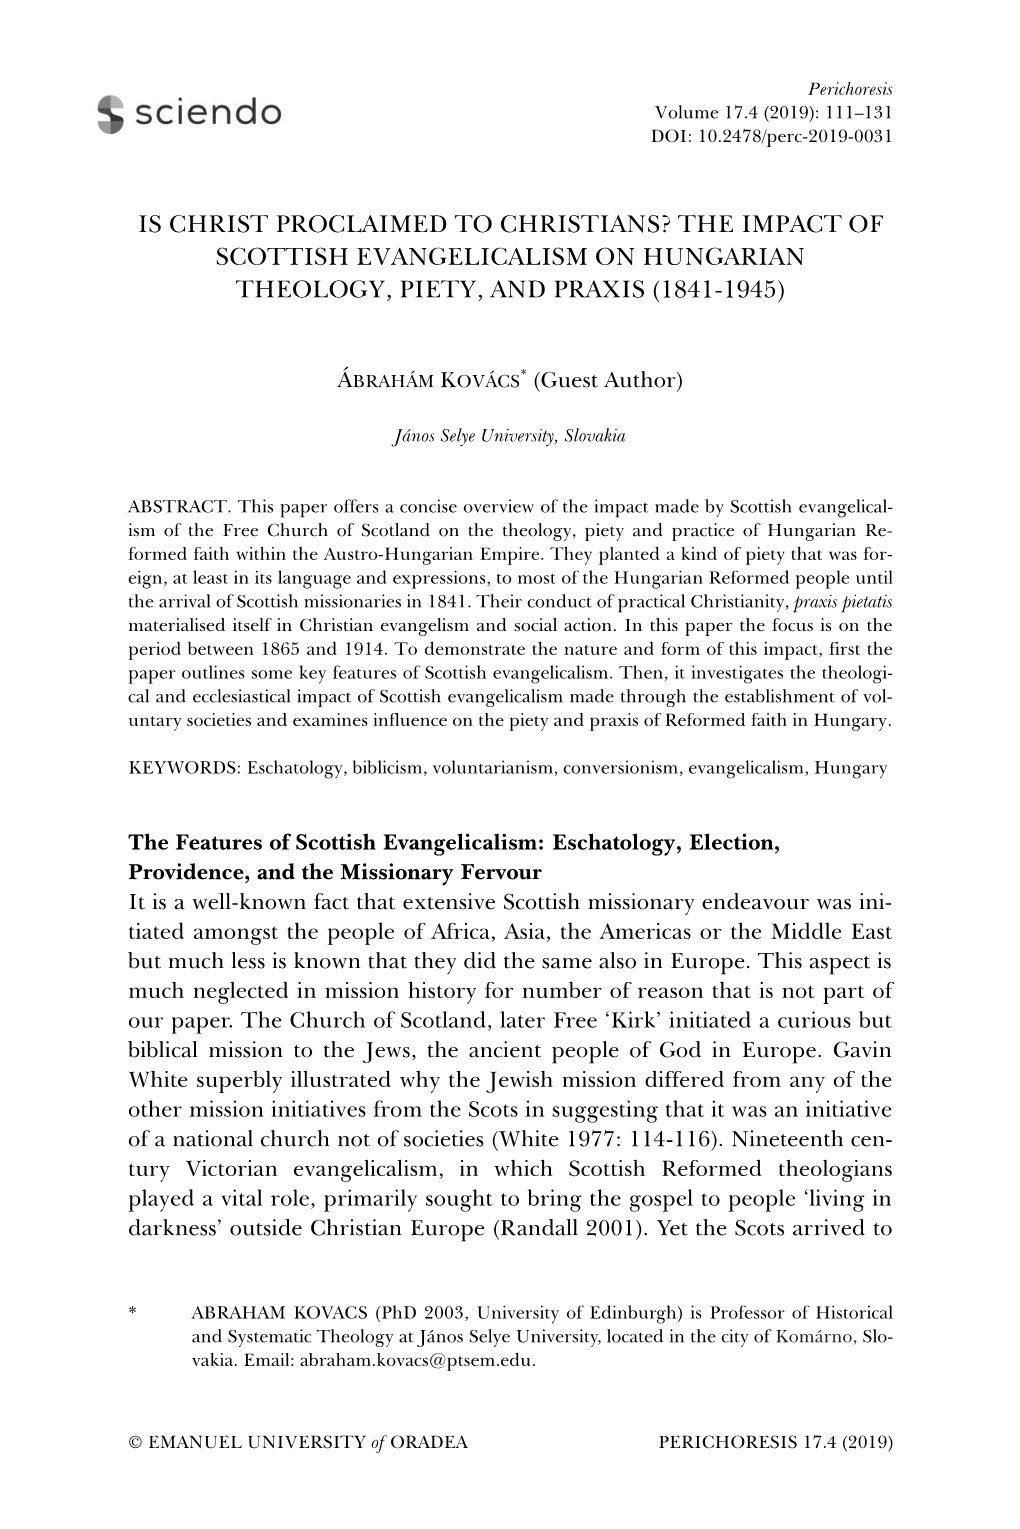 Is Christ Proclaimed to Christians? the Impact of Scottish Evangelicalism on Hungarian Theology, Piety, and Praxis (1841-1945)